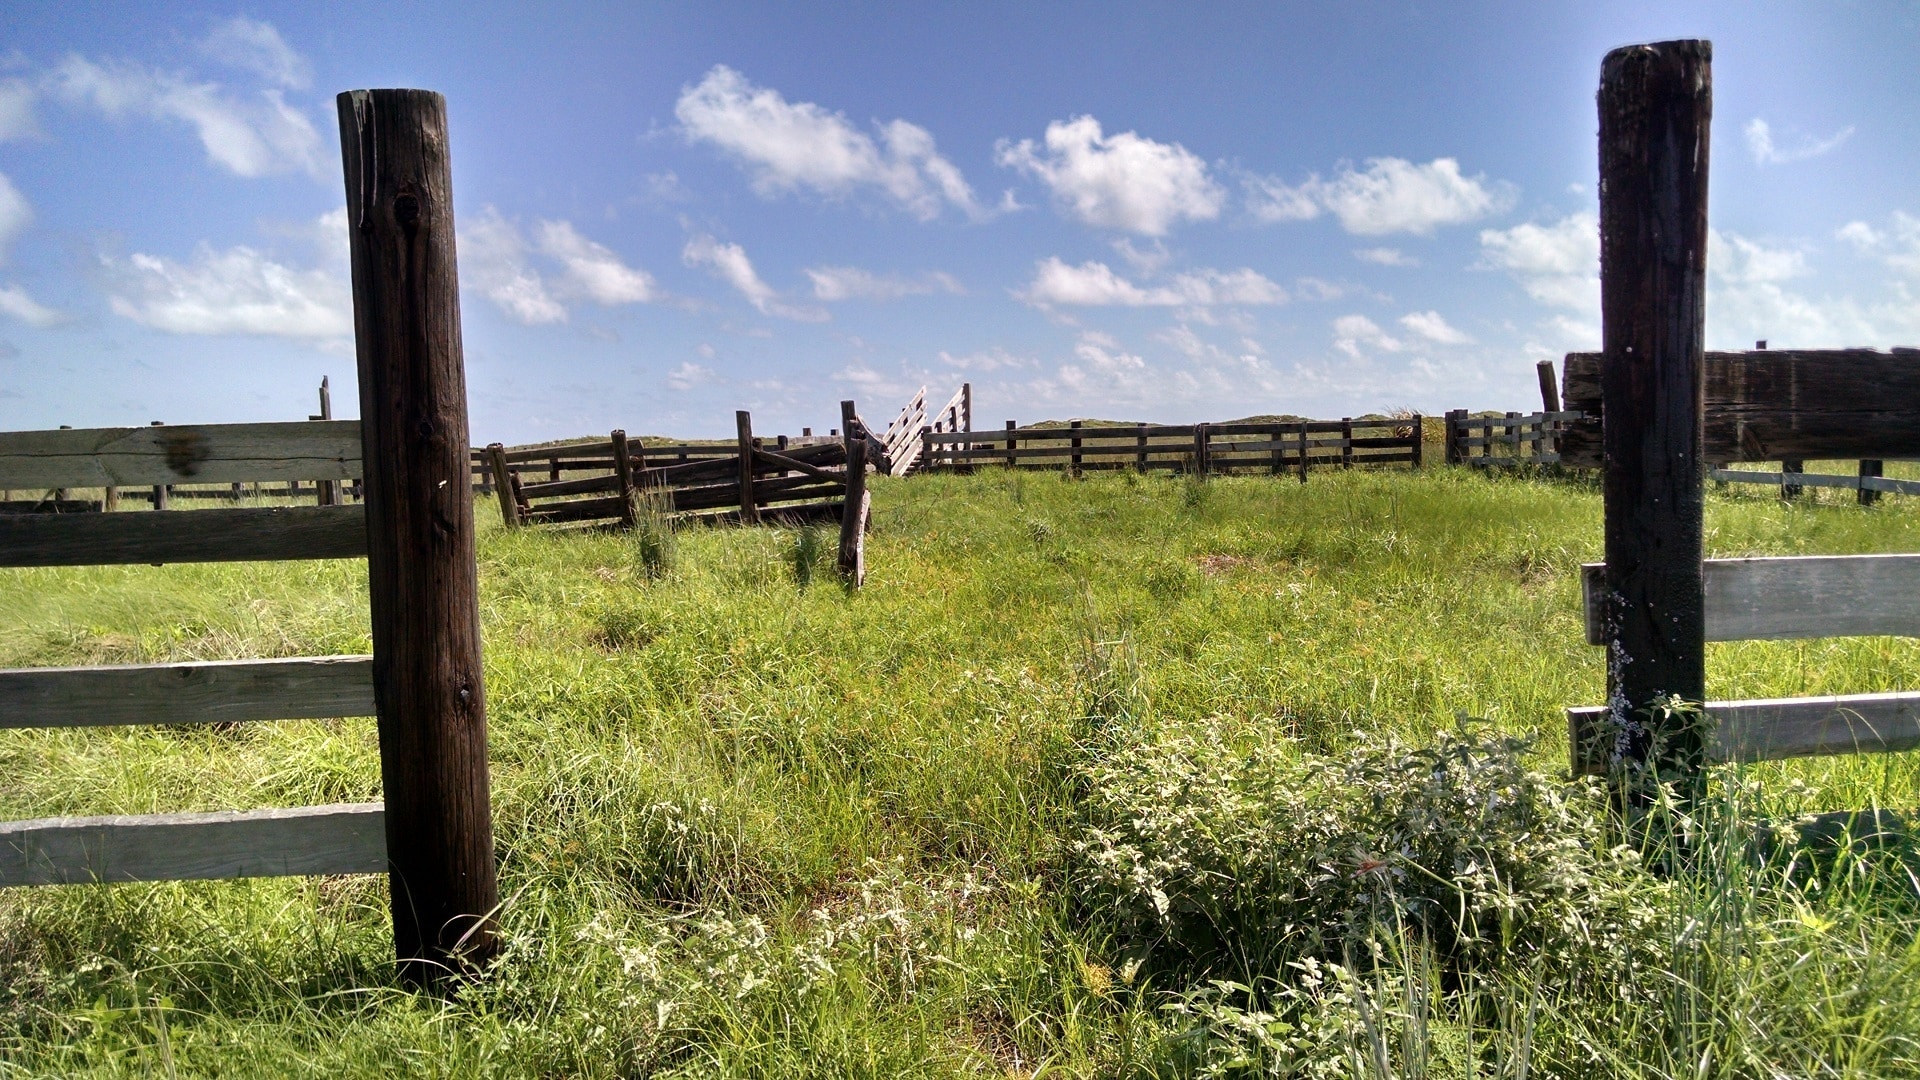 Landscape, Old, Ranch, Fences, Abandoned, grass, field